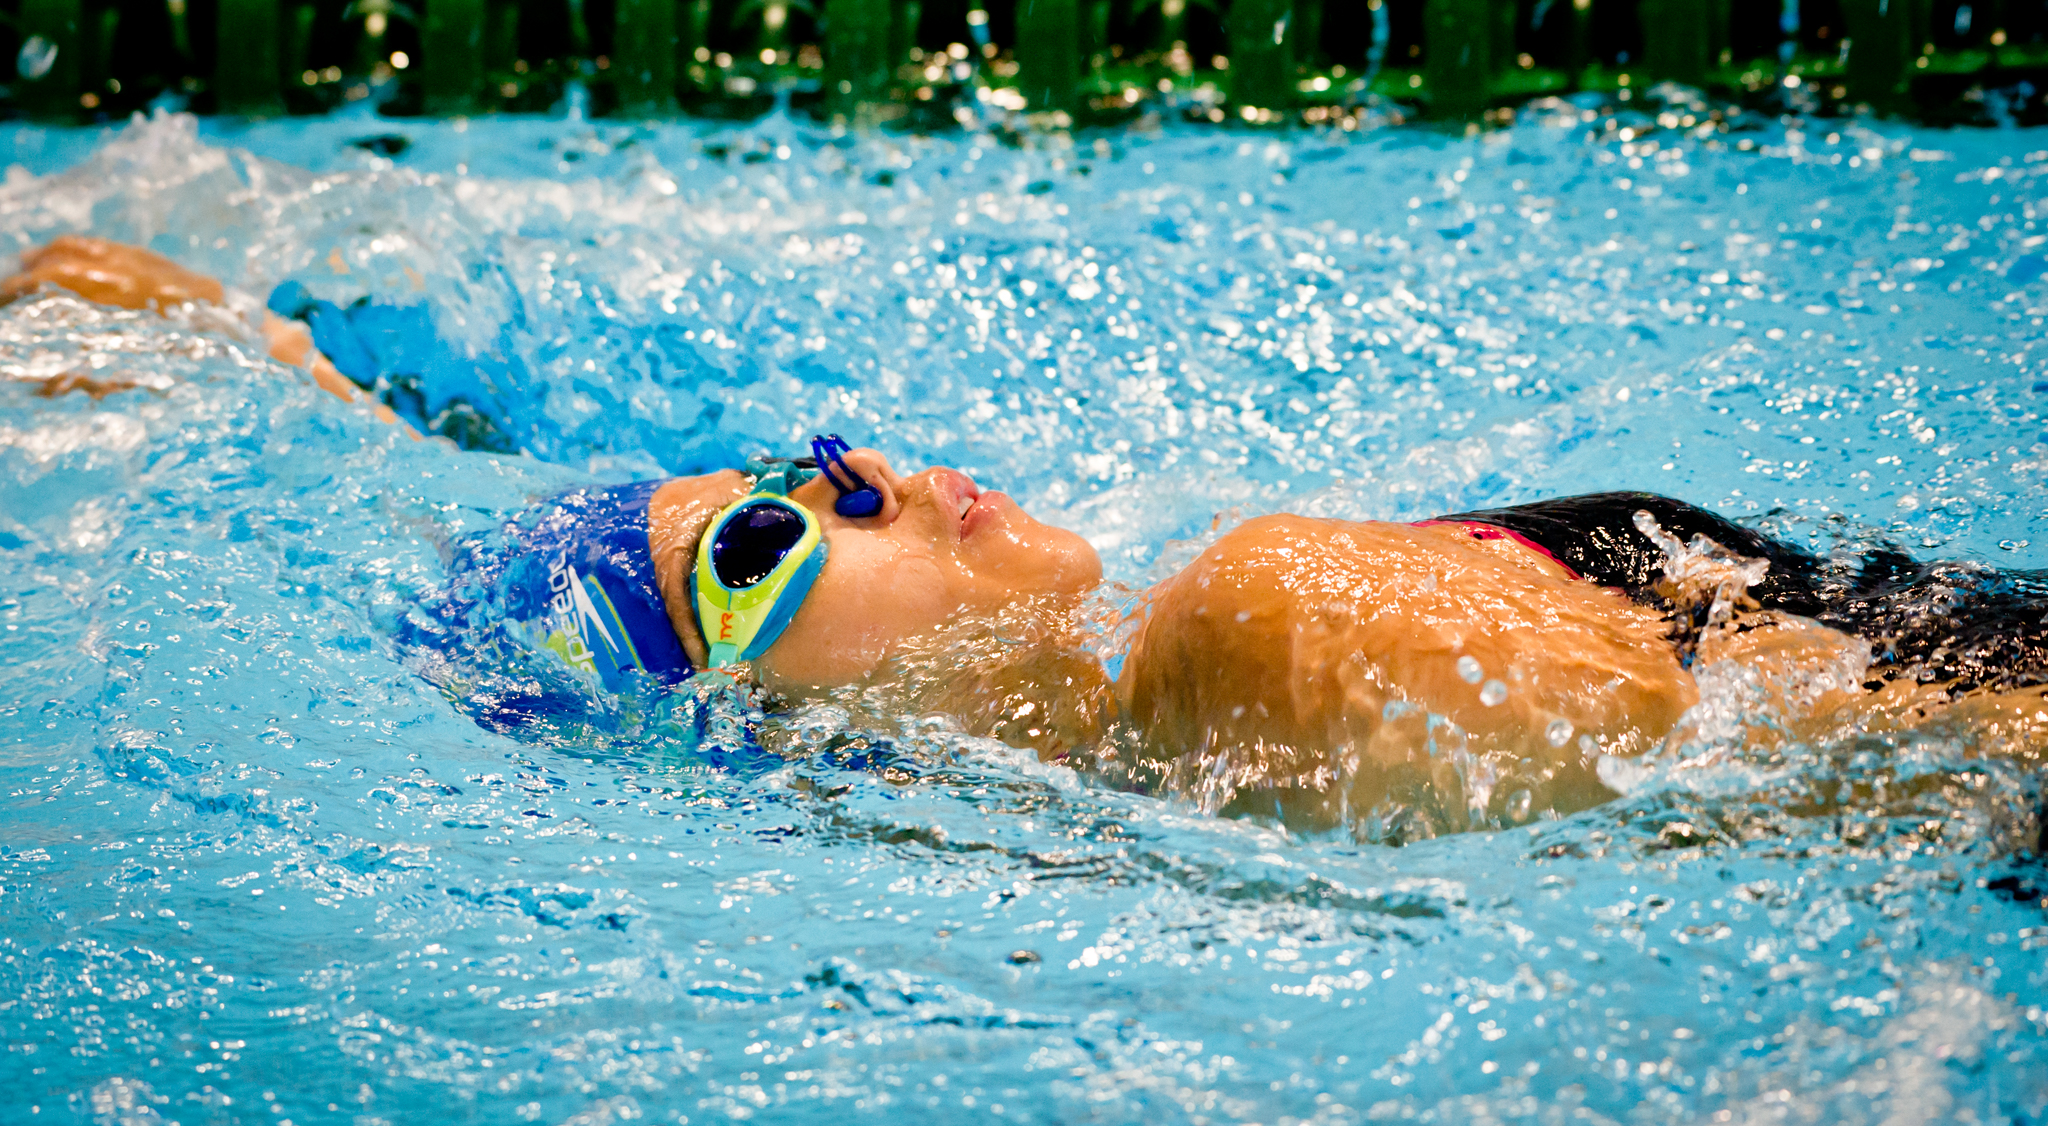 A para-swimmer en route to a world record during the ASEAN Para Games at the OCBC Aquatic Centre.